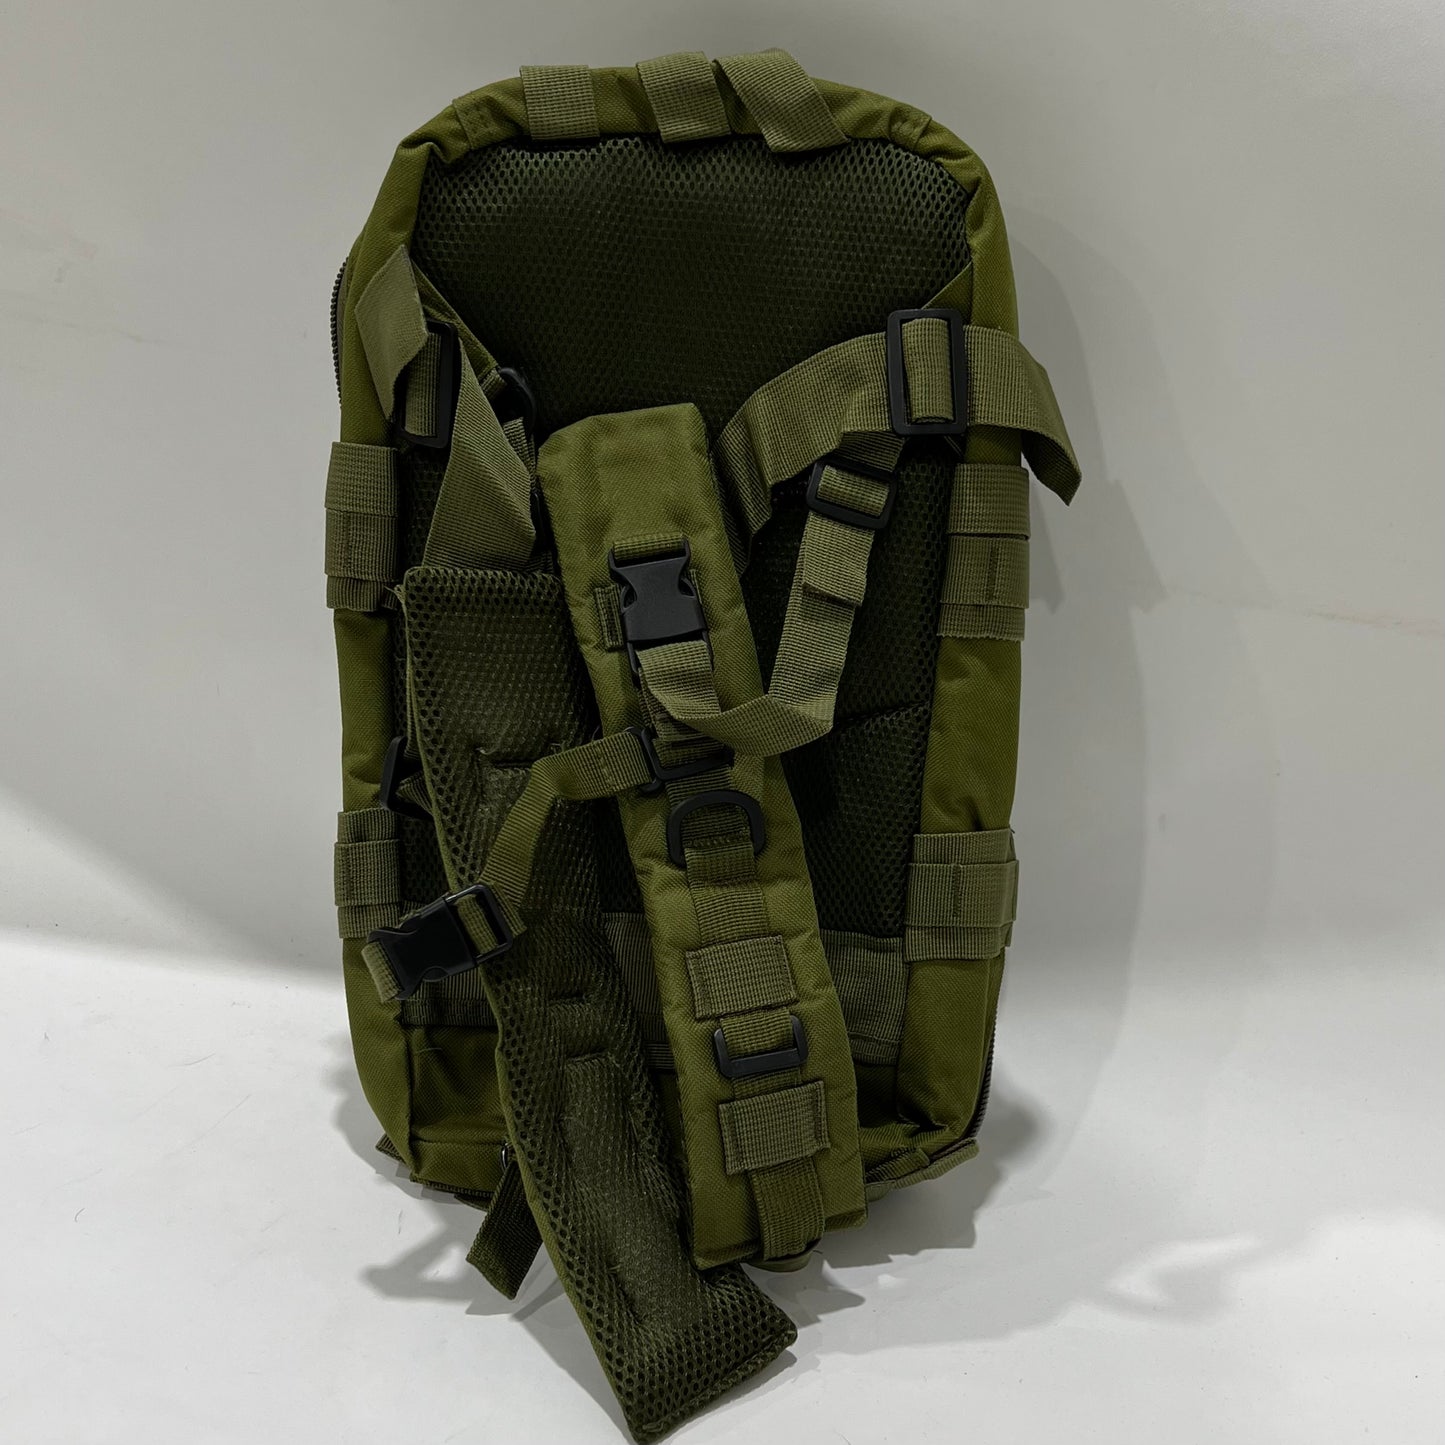 Camouflage Backpack 11" Bug Out Or Hiking Bag Great Size